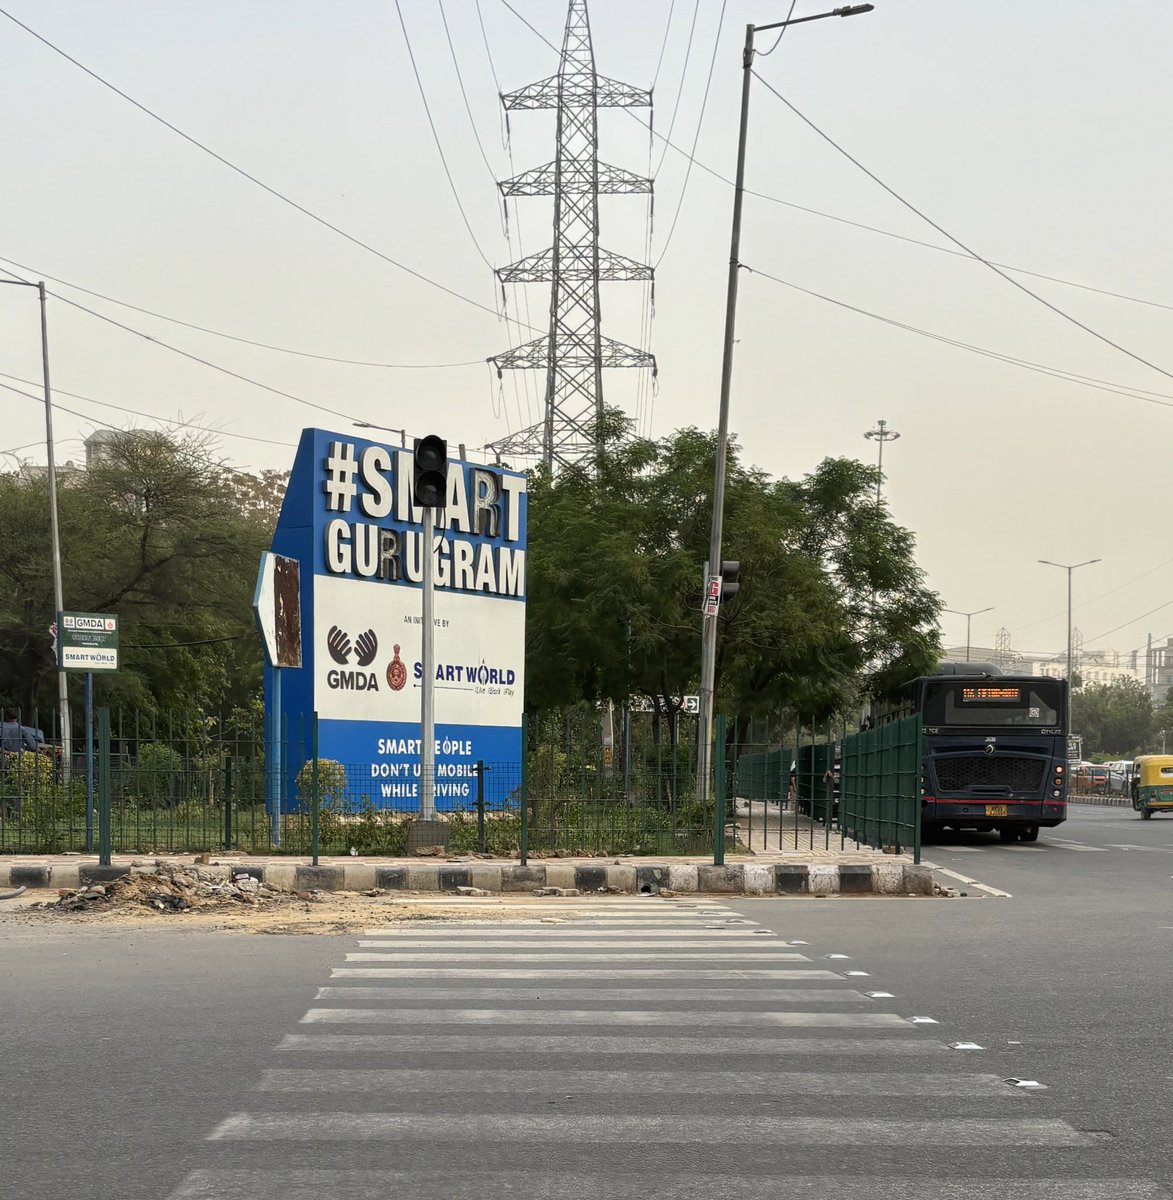 Zebra crossing leading to inaccessible, guardrail-ed footpaths at a junction with heavy vehicular traffic in “Smart” Gurgaon.

In a country that still heavily commutes with non-motorised modes of transport, we are so far from creating #streetsforall.